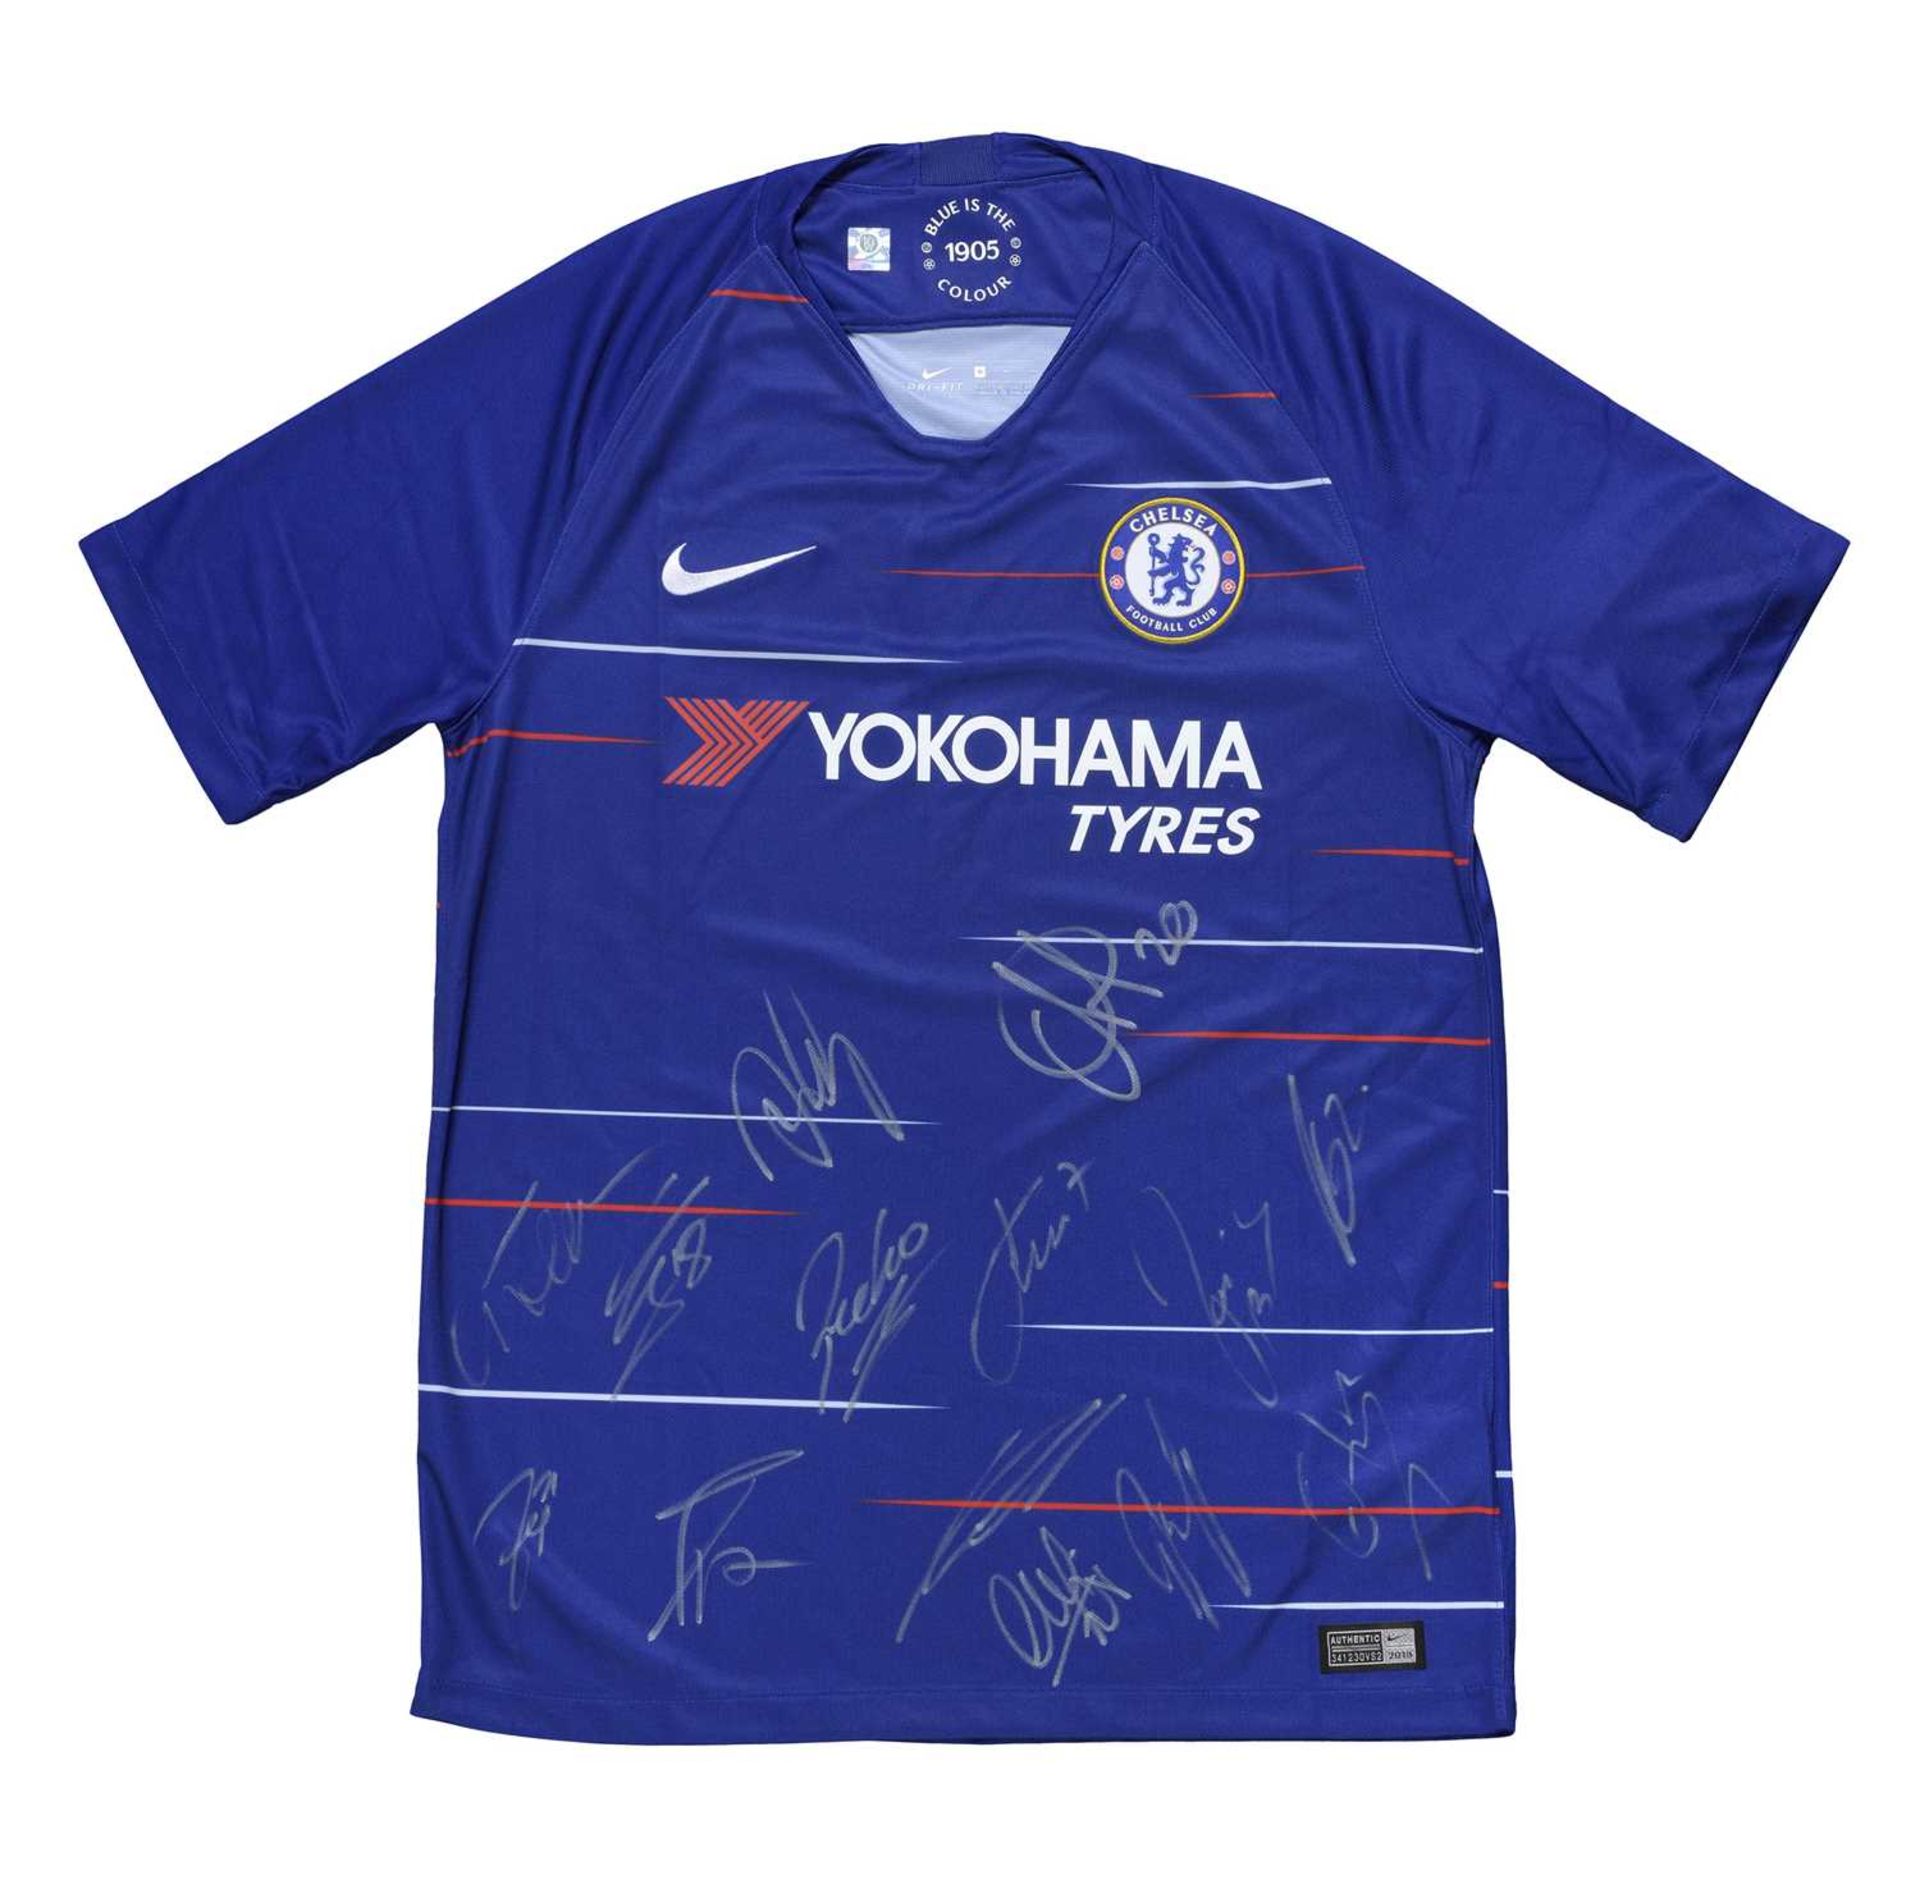 Chelsea FC Football Shirt Signed by the 2018/2019 Chelsea Team The shirt comes with a certificate of